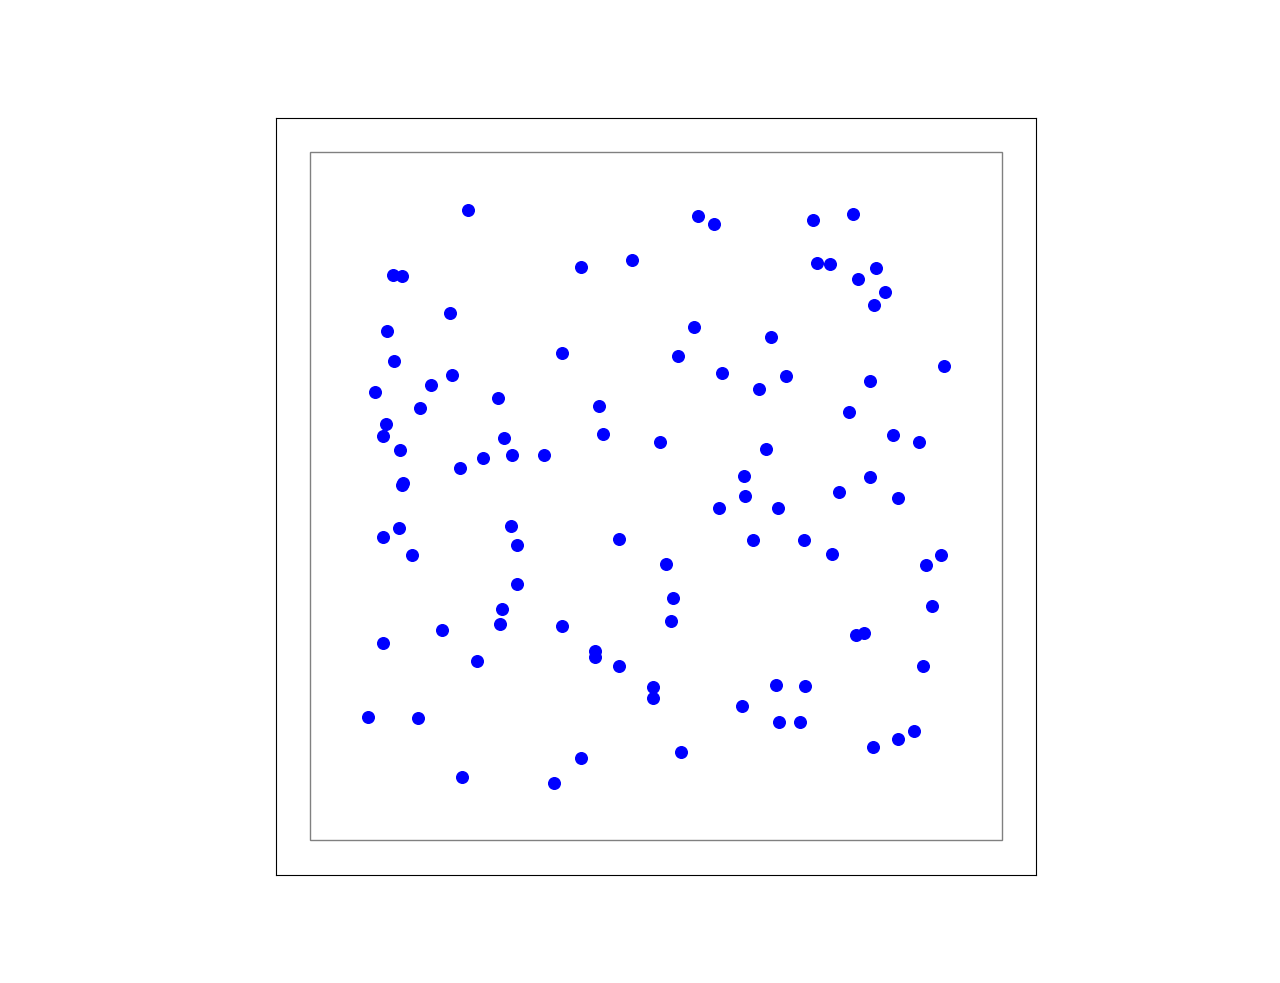 Example of a free layer, in which the neurons are positioned in a random uniform manner.